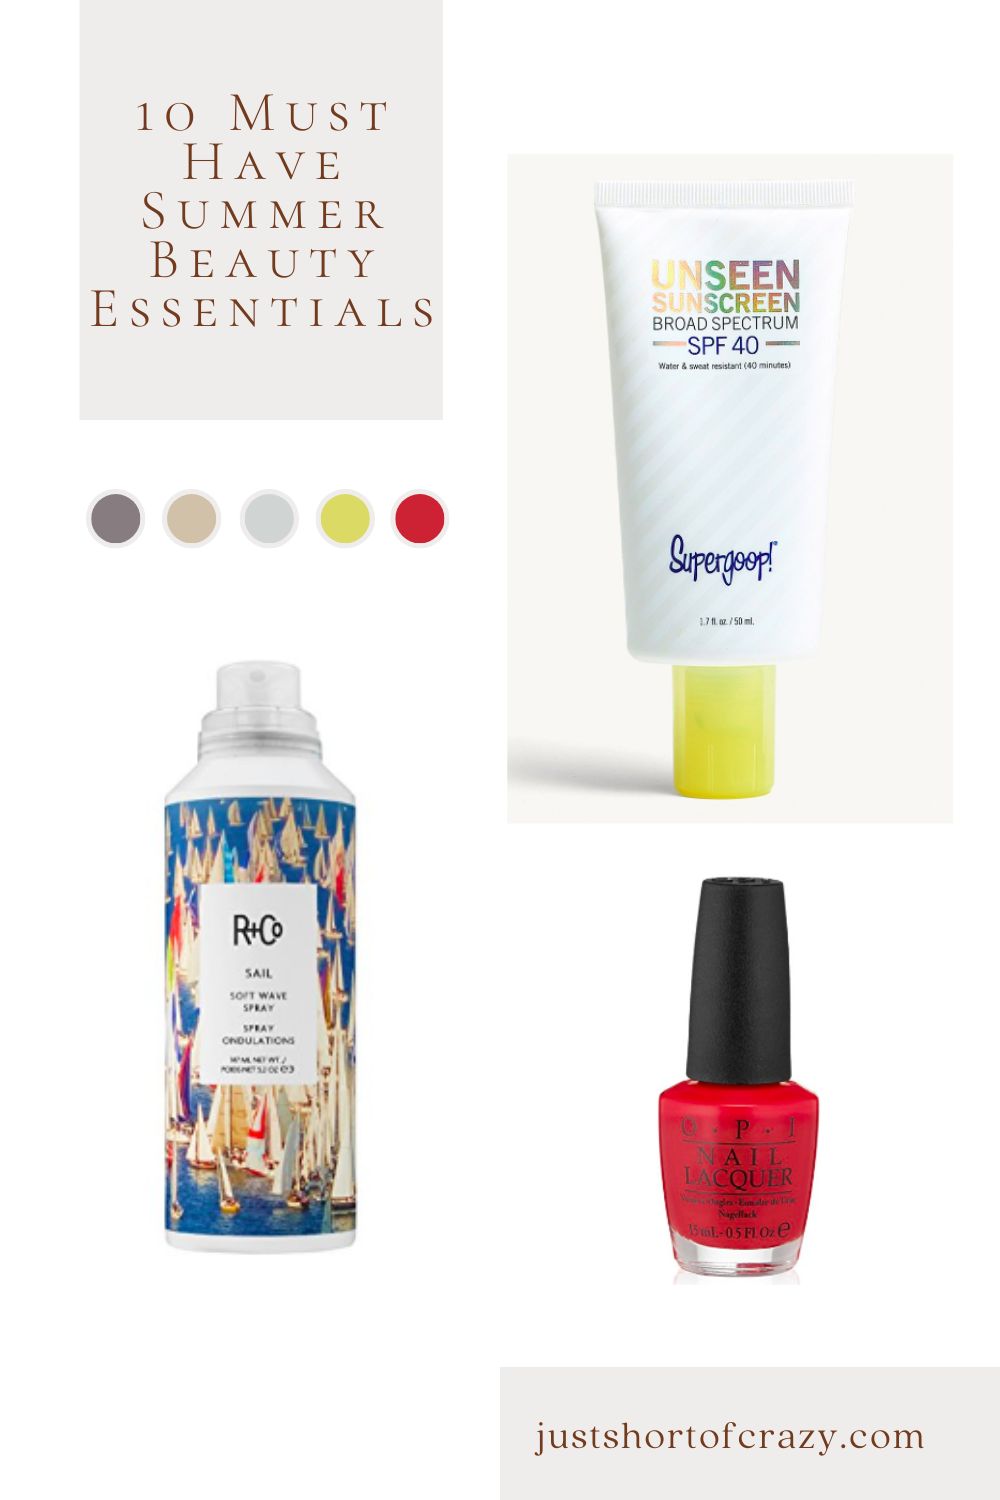 10 Must Have Summer Beauty Essentials - Just Short of Crazy